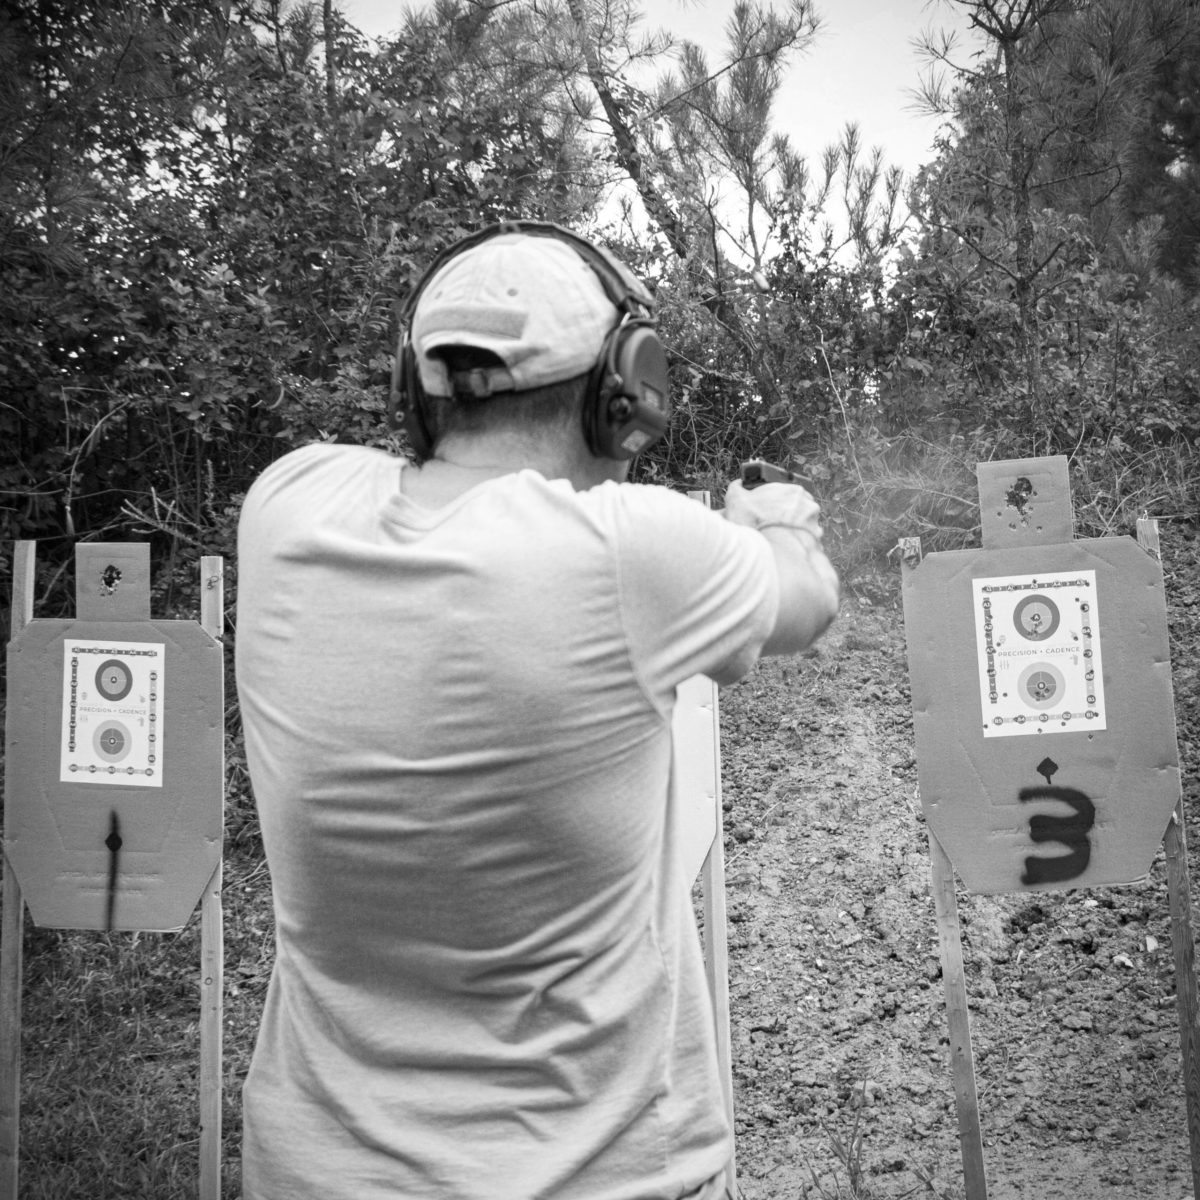 shooting drills to help you get better at shooting and concealed carry